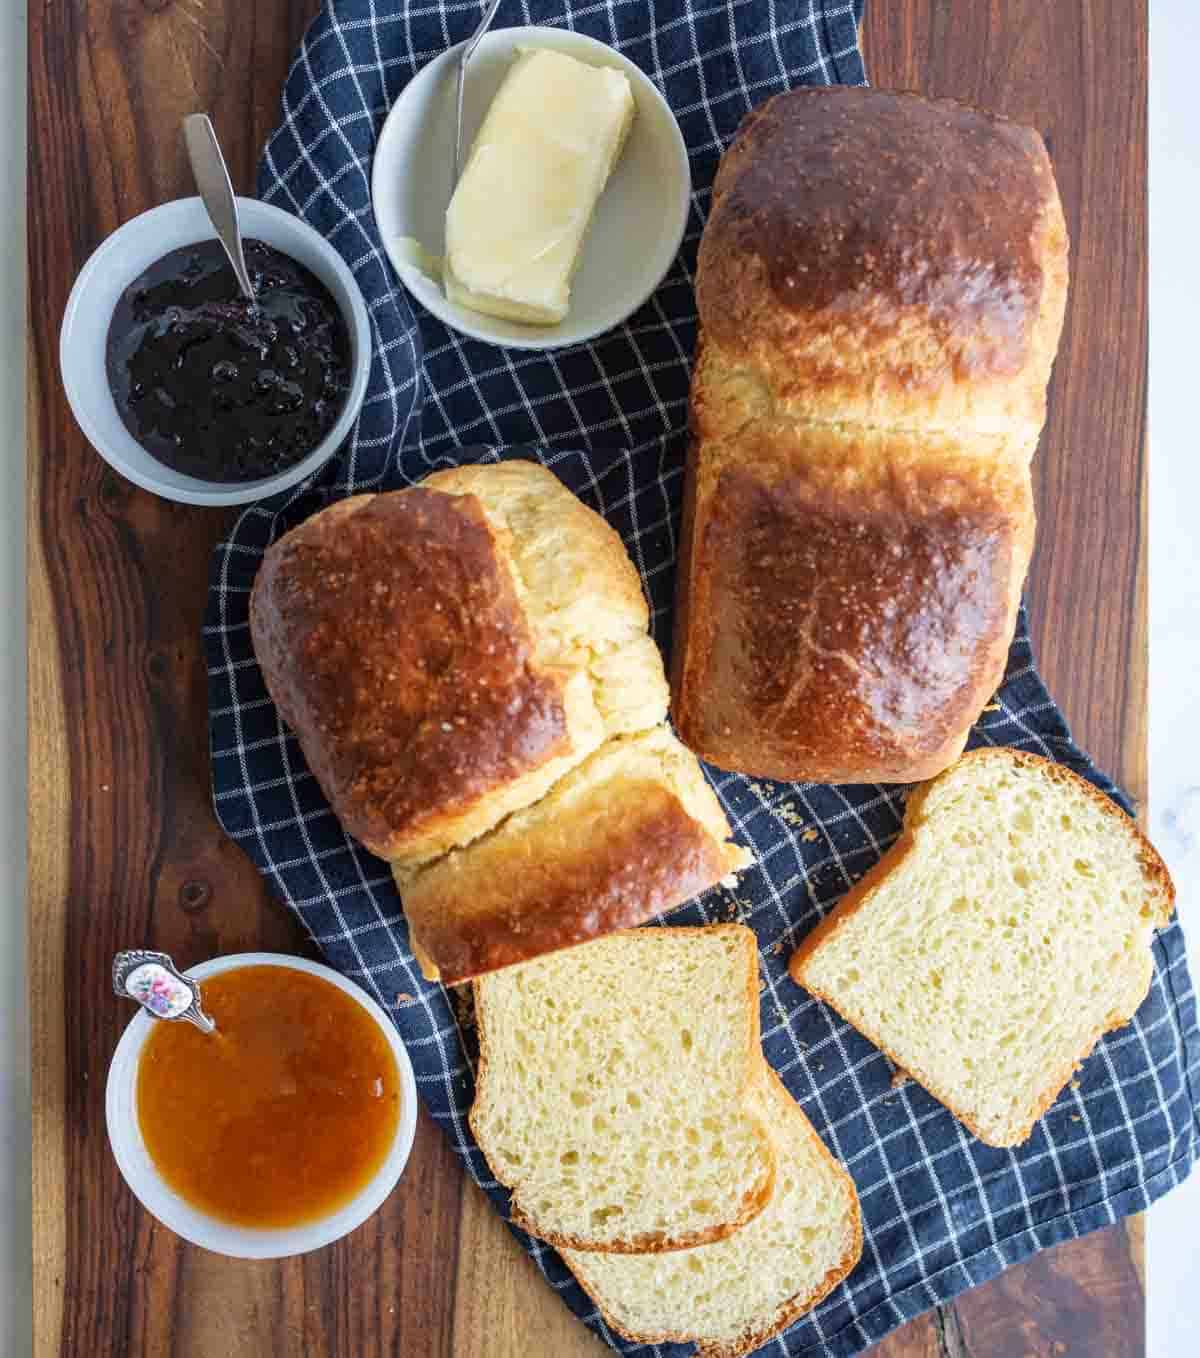 golden baked brioche bread loafs sliced with butter and jam on the side